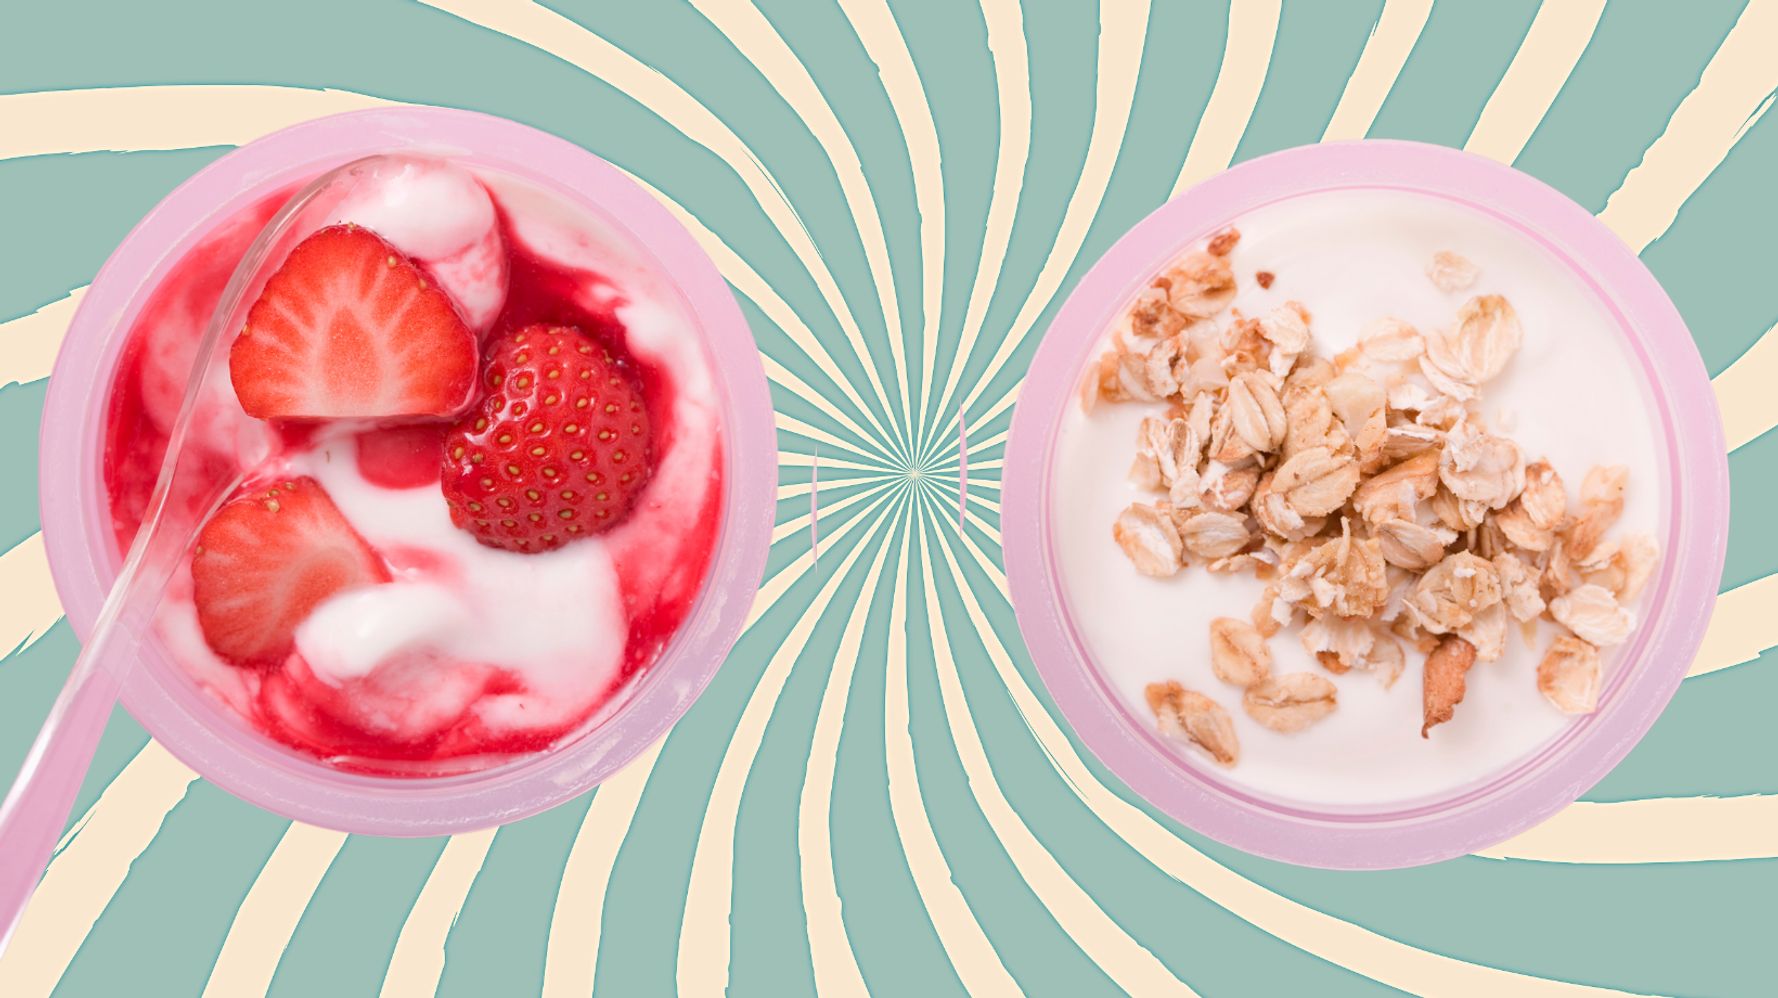 A Less Processed Life: What's For Lunch: Yogurt, Muesli, and Berries